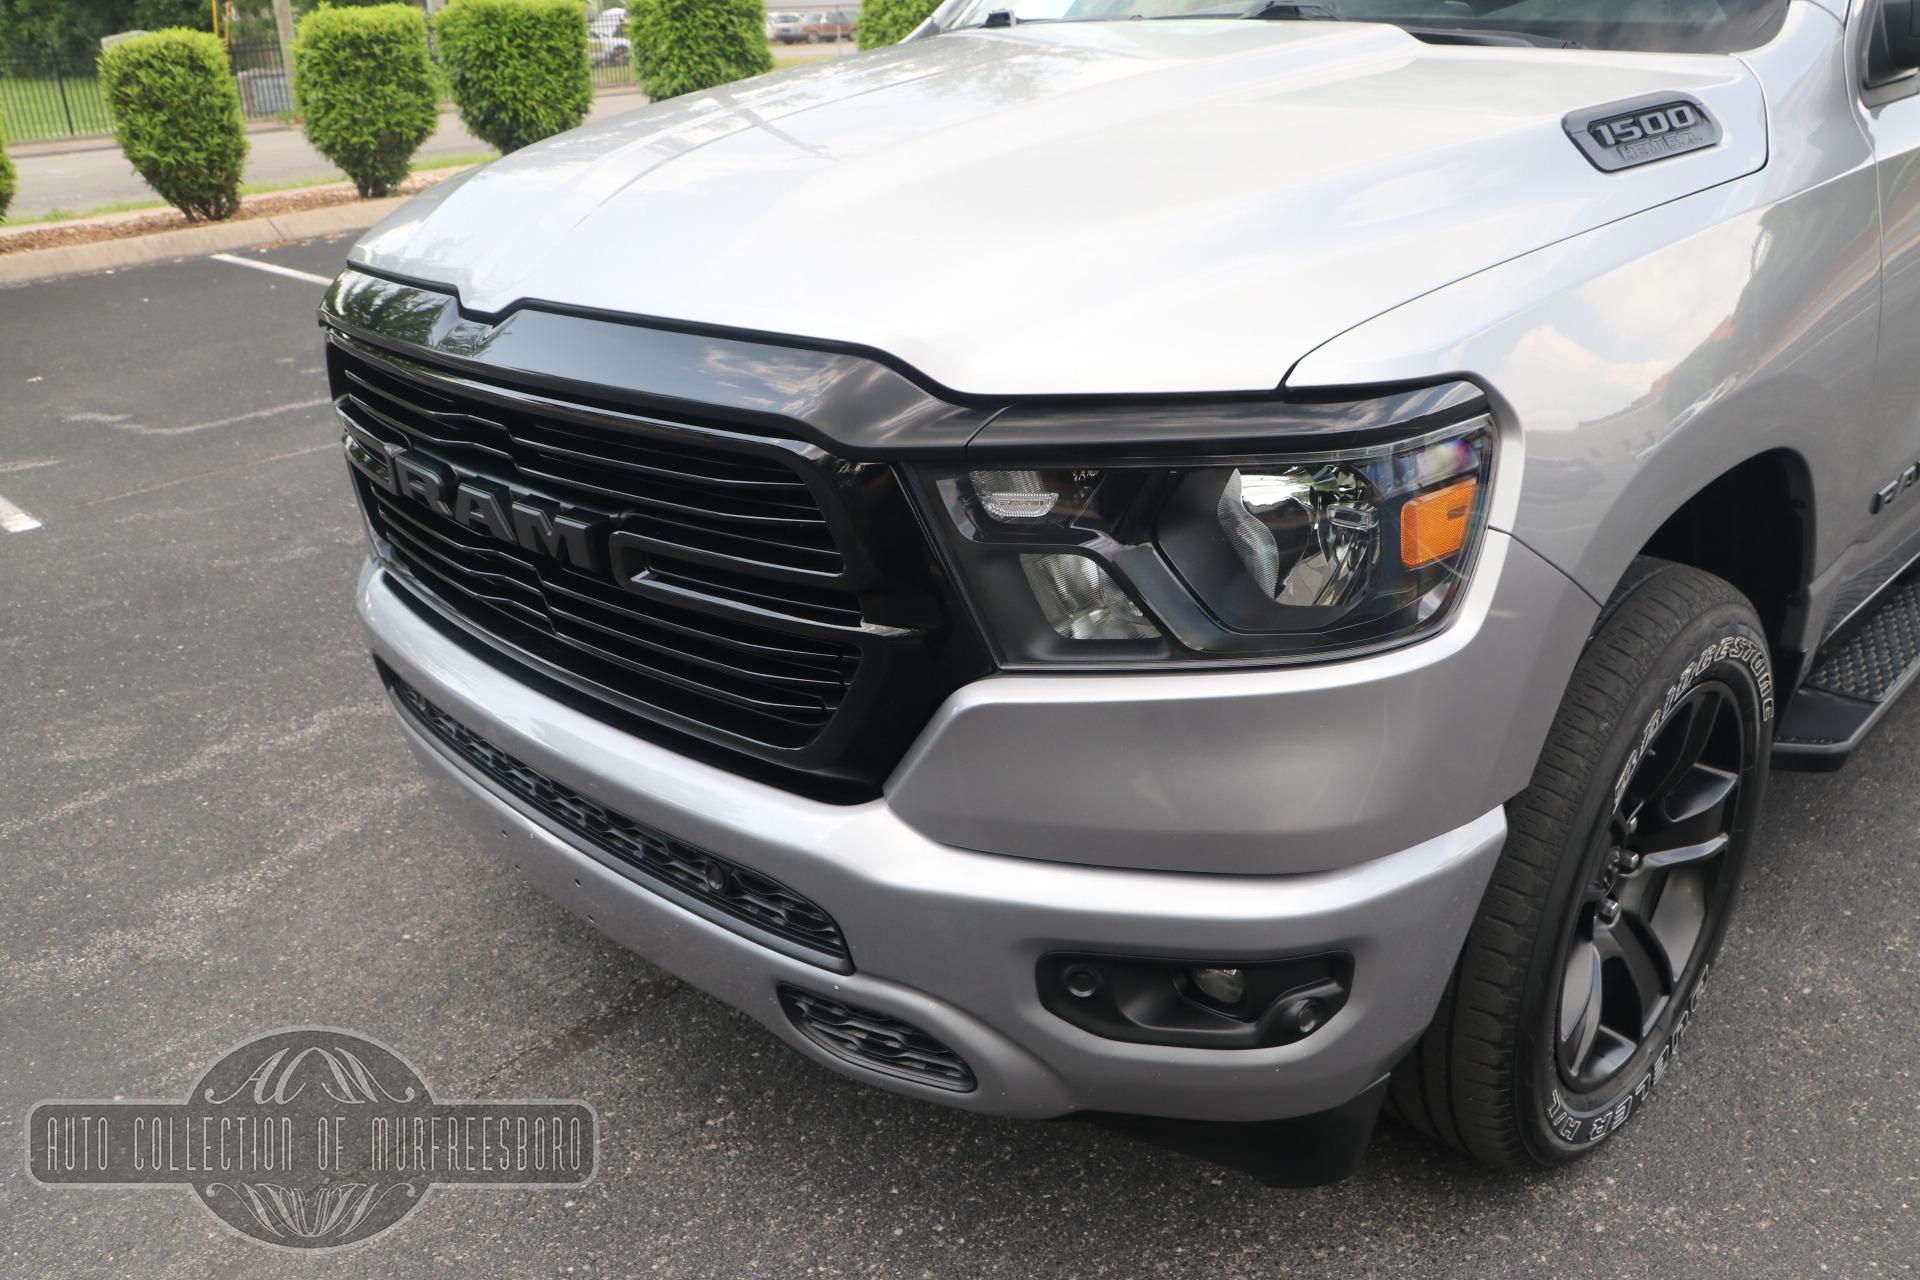 Used Ram 1500 Big Horn Crew Cab Night Edition 5 7l V8 W Nav For Sale 45 950 Auto Collection Stock